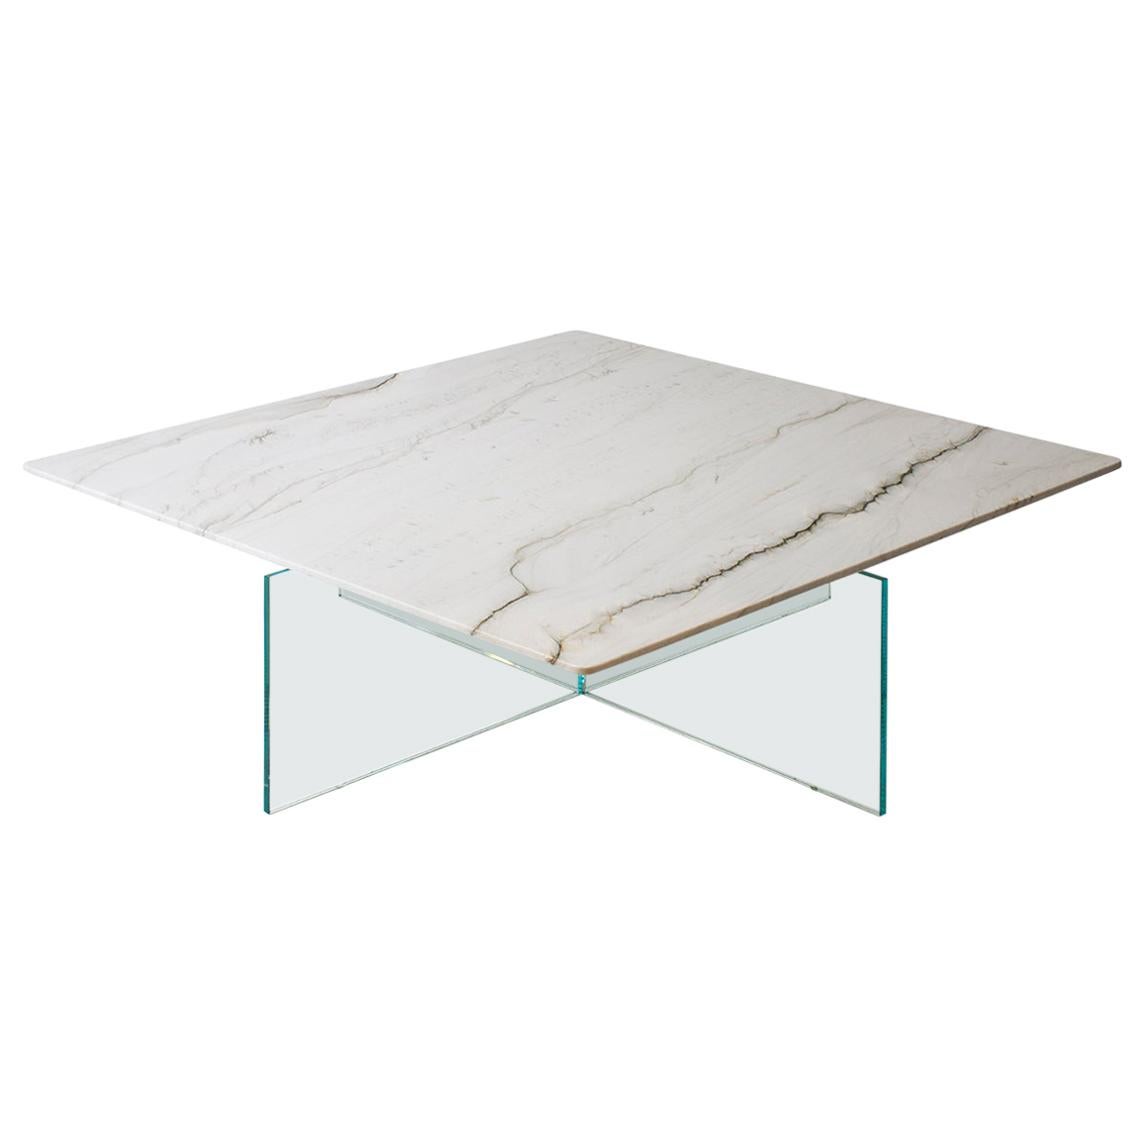 Claste Beside Myself Medium Coffee Table in Cararra Classico Marble with Glass For Sale